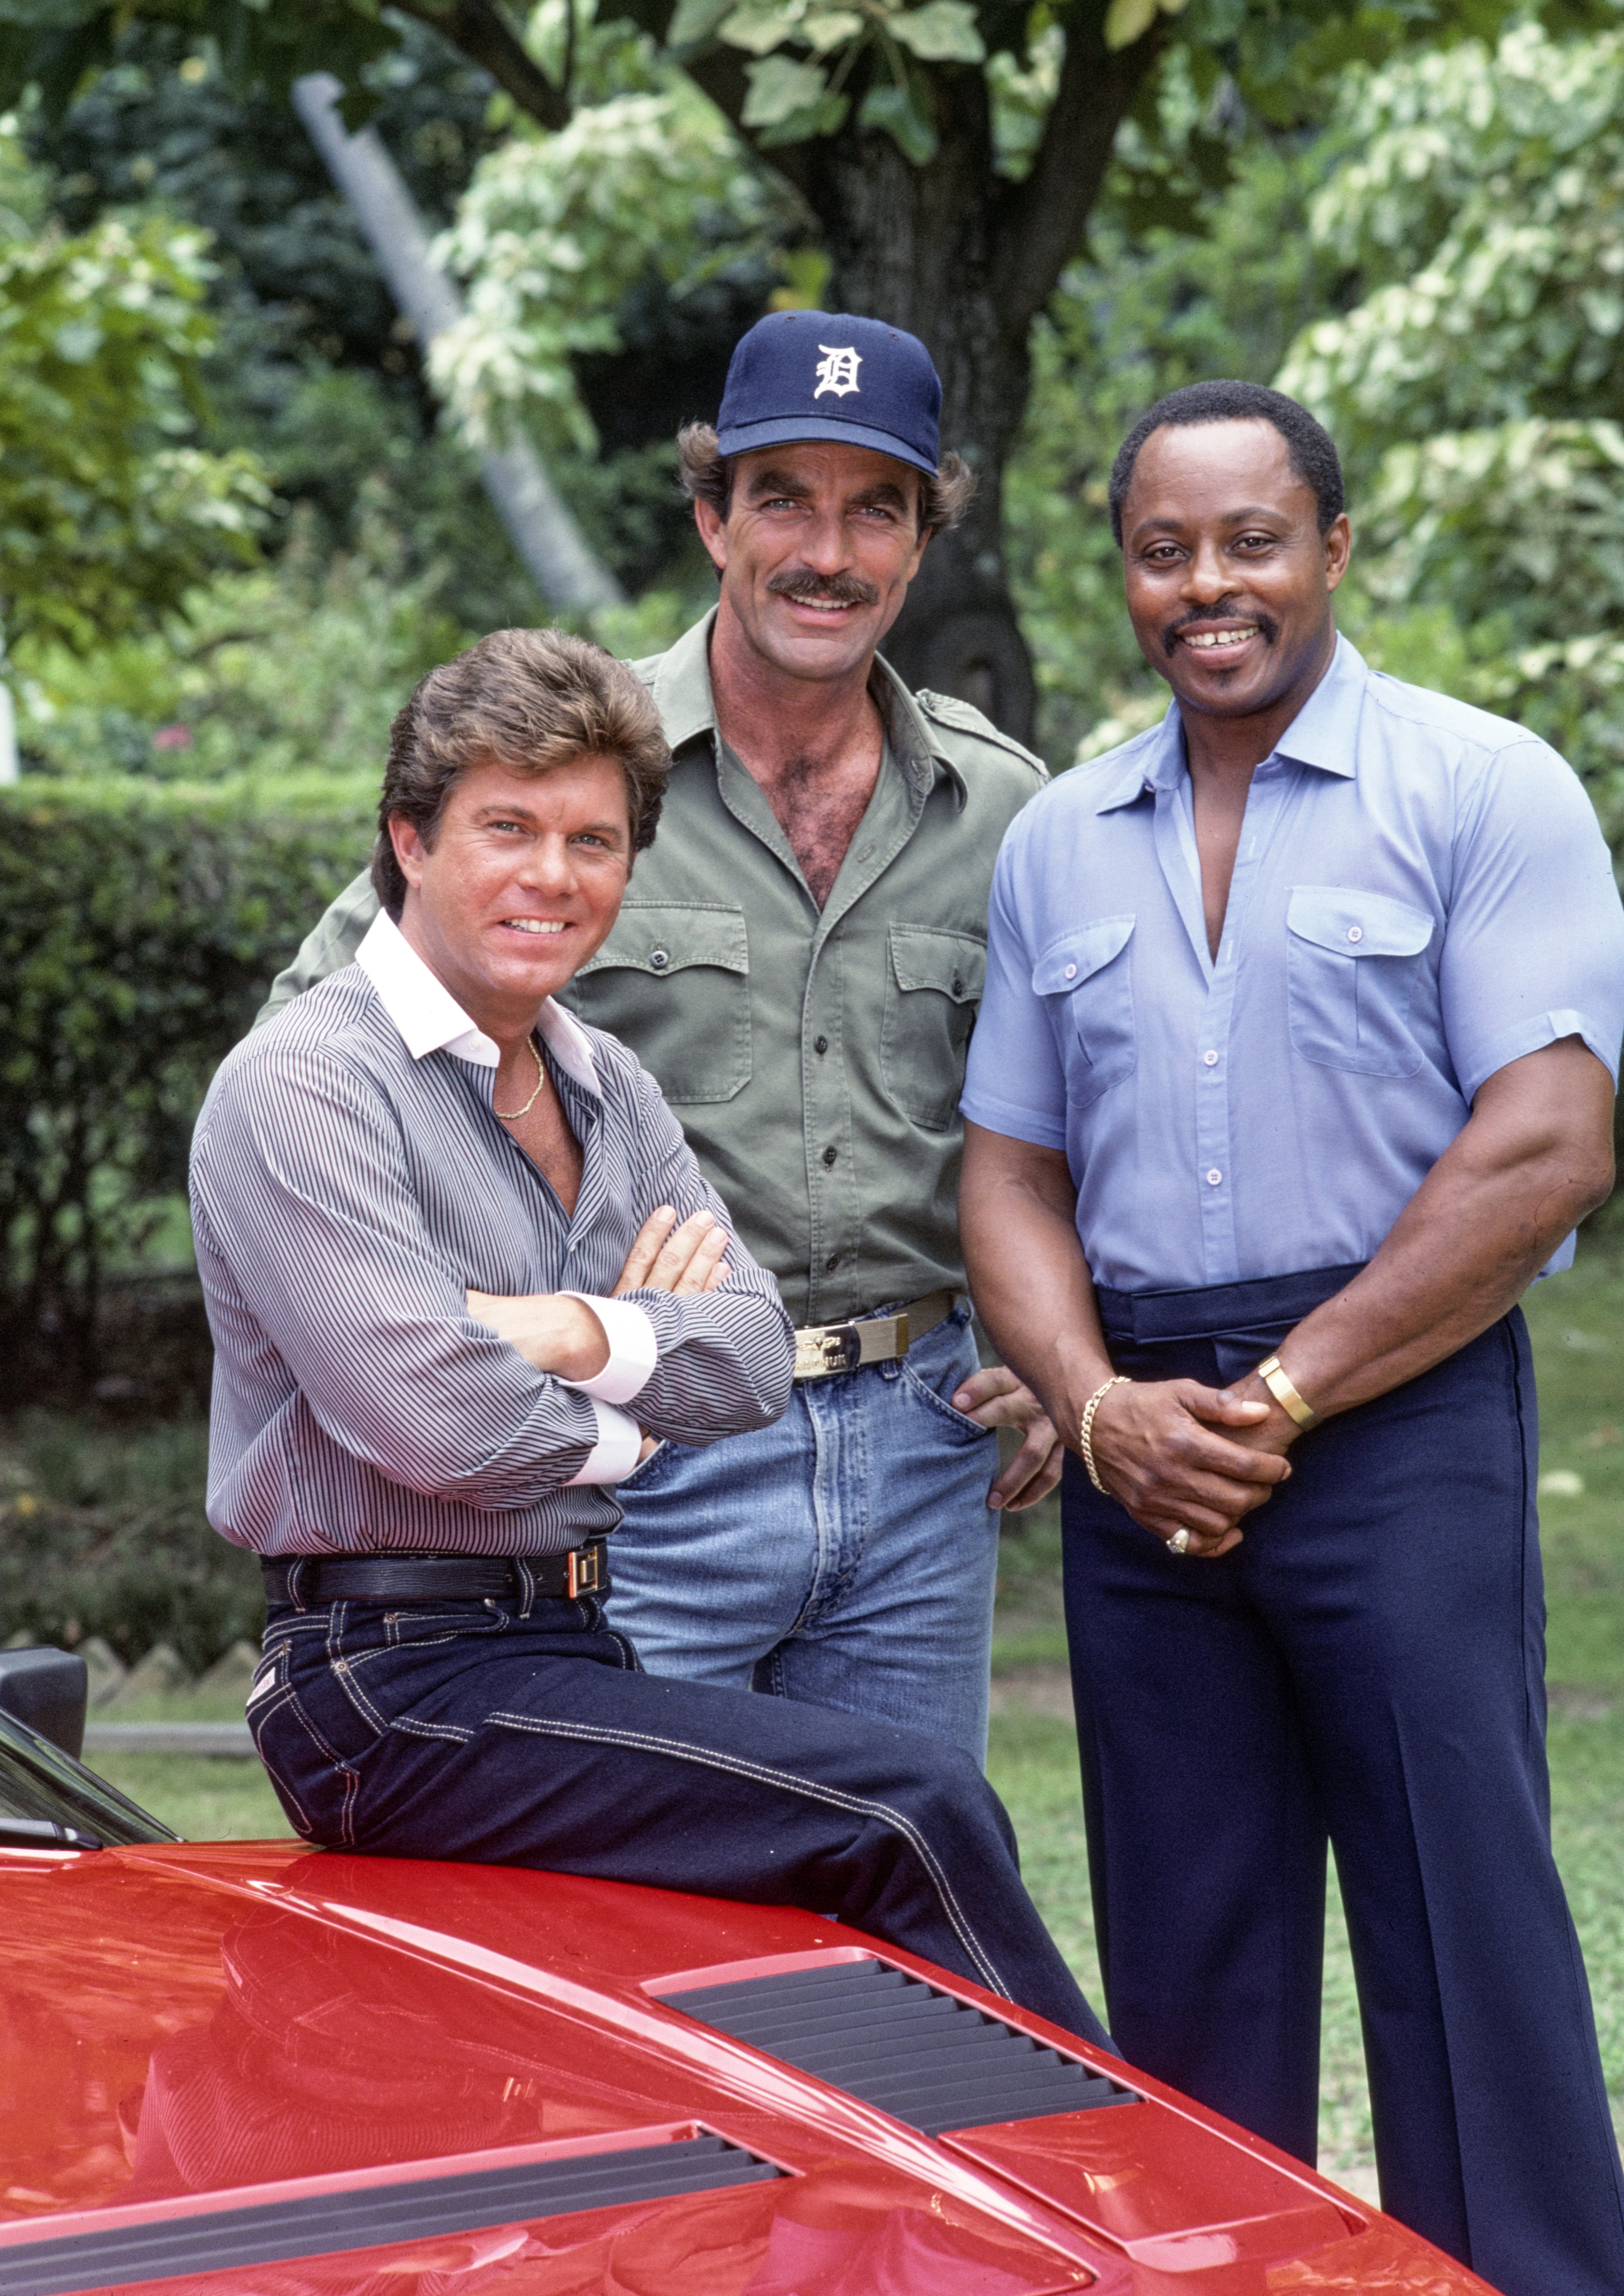 Pictured from left is Larry Manetti (as Orville 'Rick' Wright), Tom Selleck (as Magnum), Roger E. Mosley (as Theodore 'TC' Calvin) in the CBS television series | Source: Getty Images